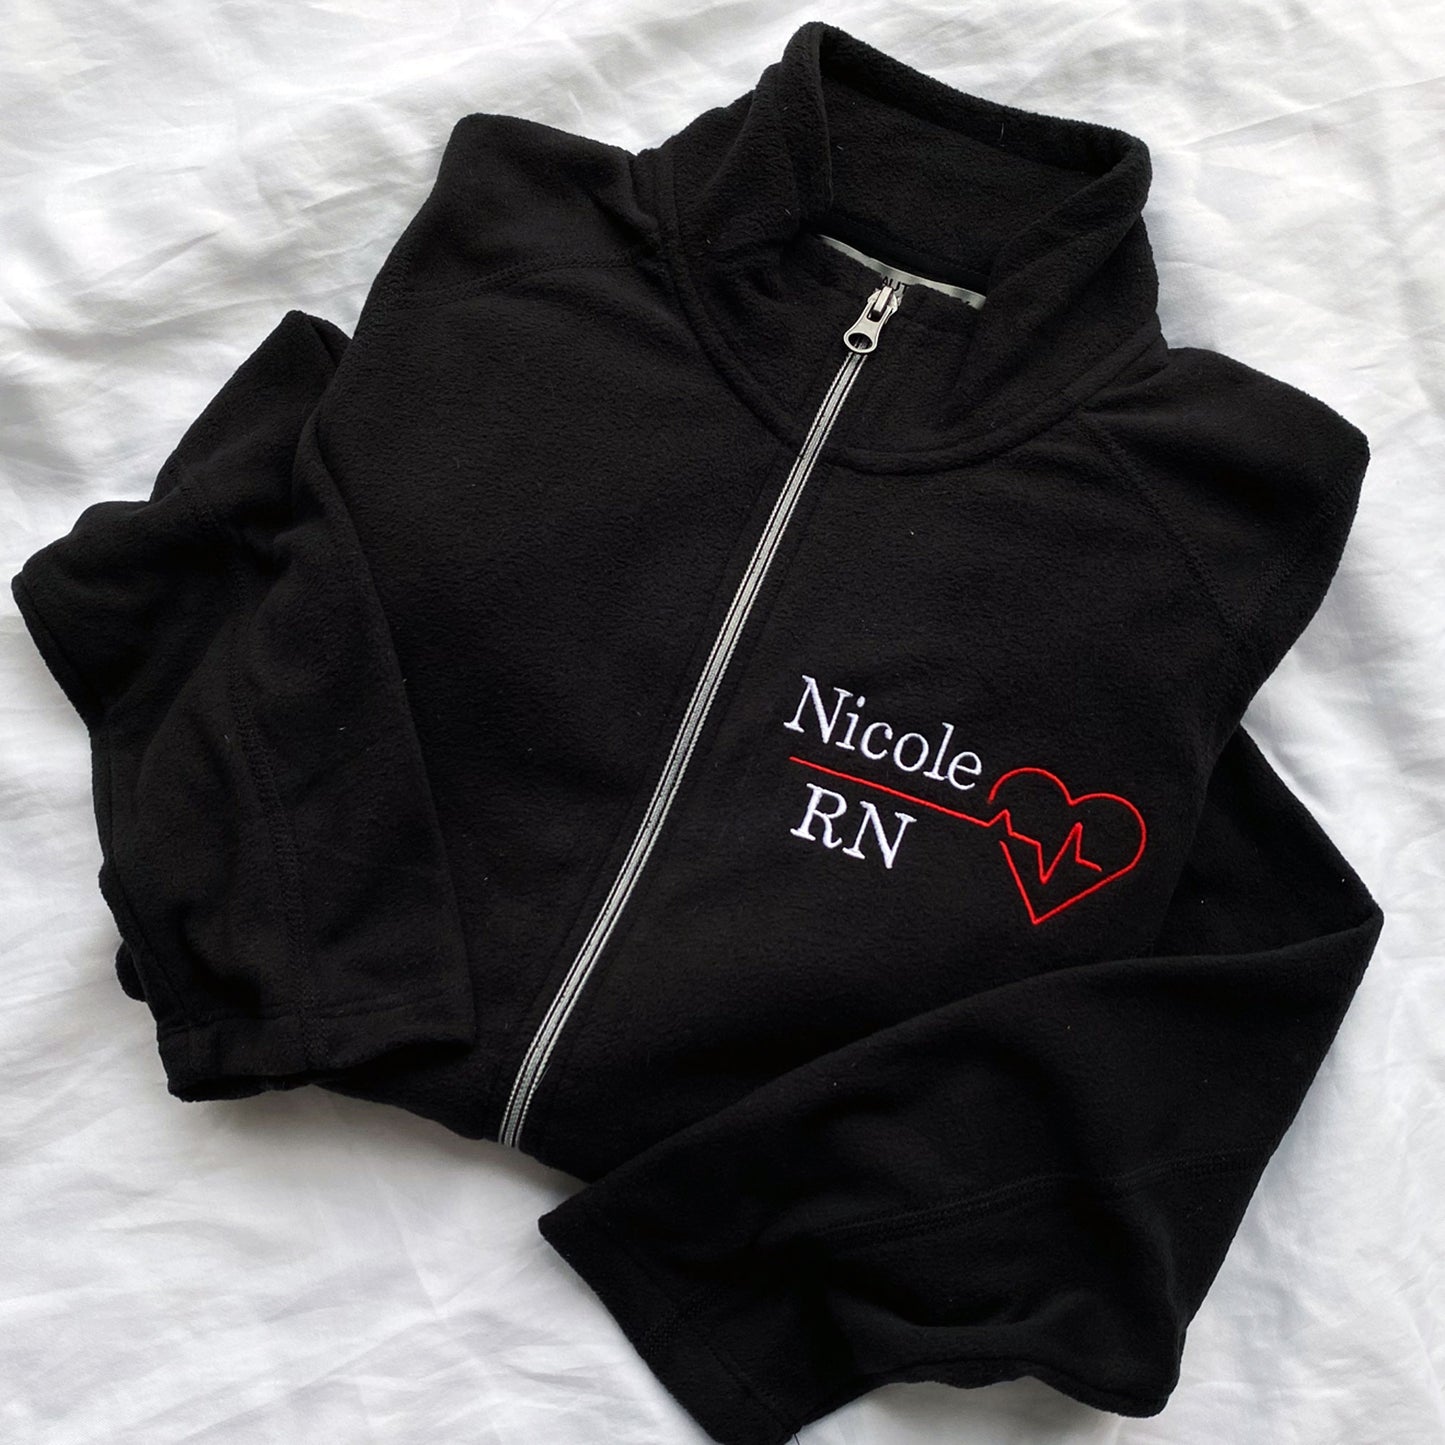 Black lightweight fleece full zip with custom name, credential, and heartbeat embroidered design on the left chest. 